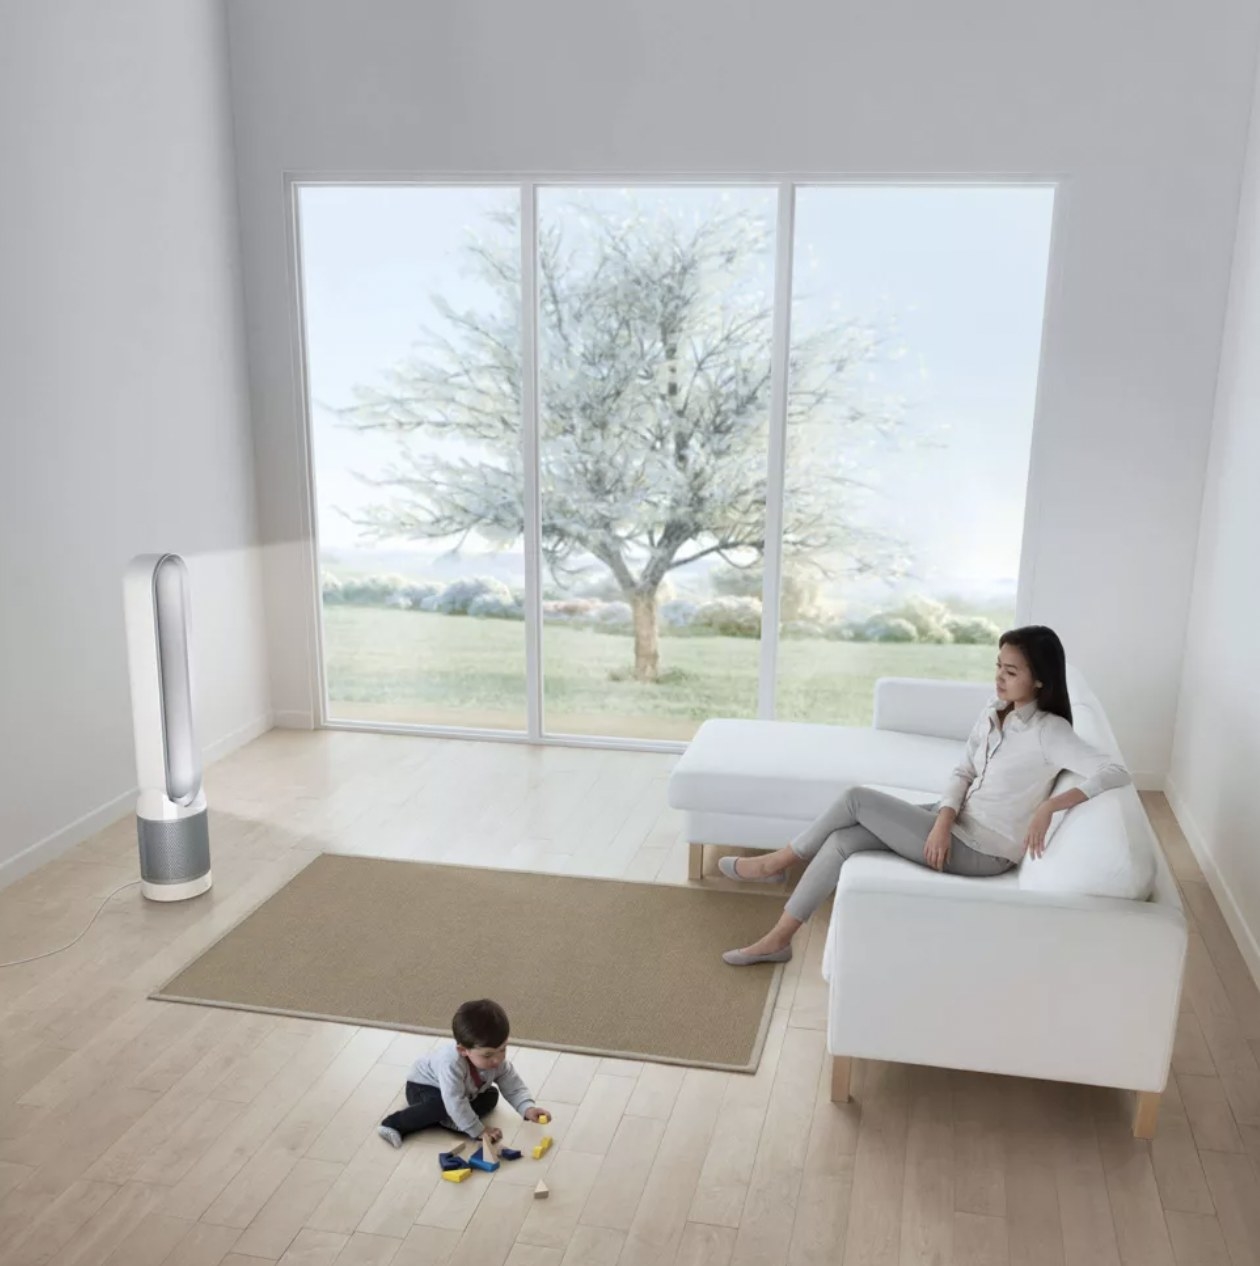 The fan tower blowing clean air at parent on couch while child plays on floor